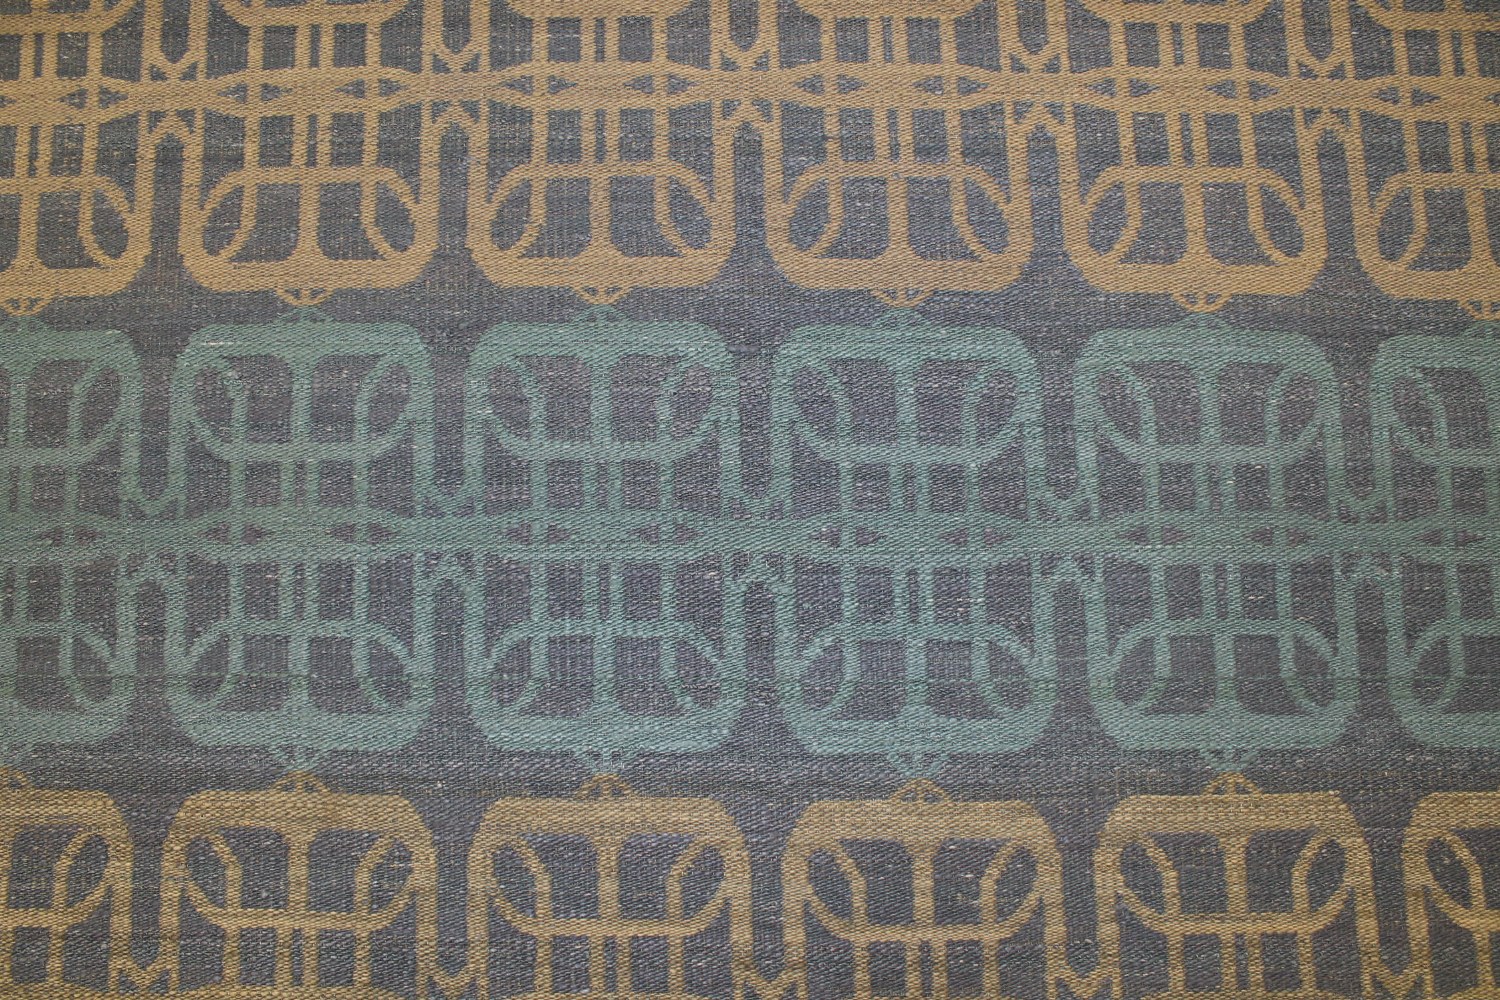 10x14 Flat Weave Hand Knotted Wool Area Rug - MR21019